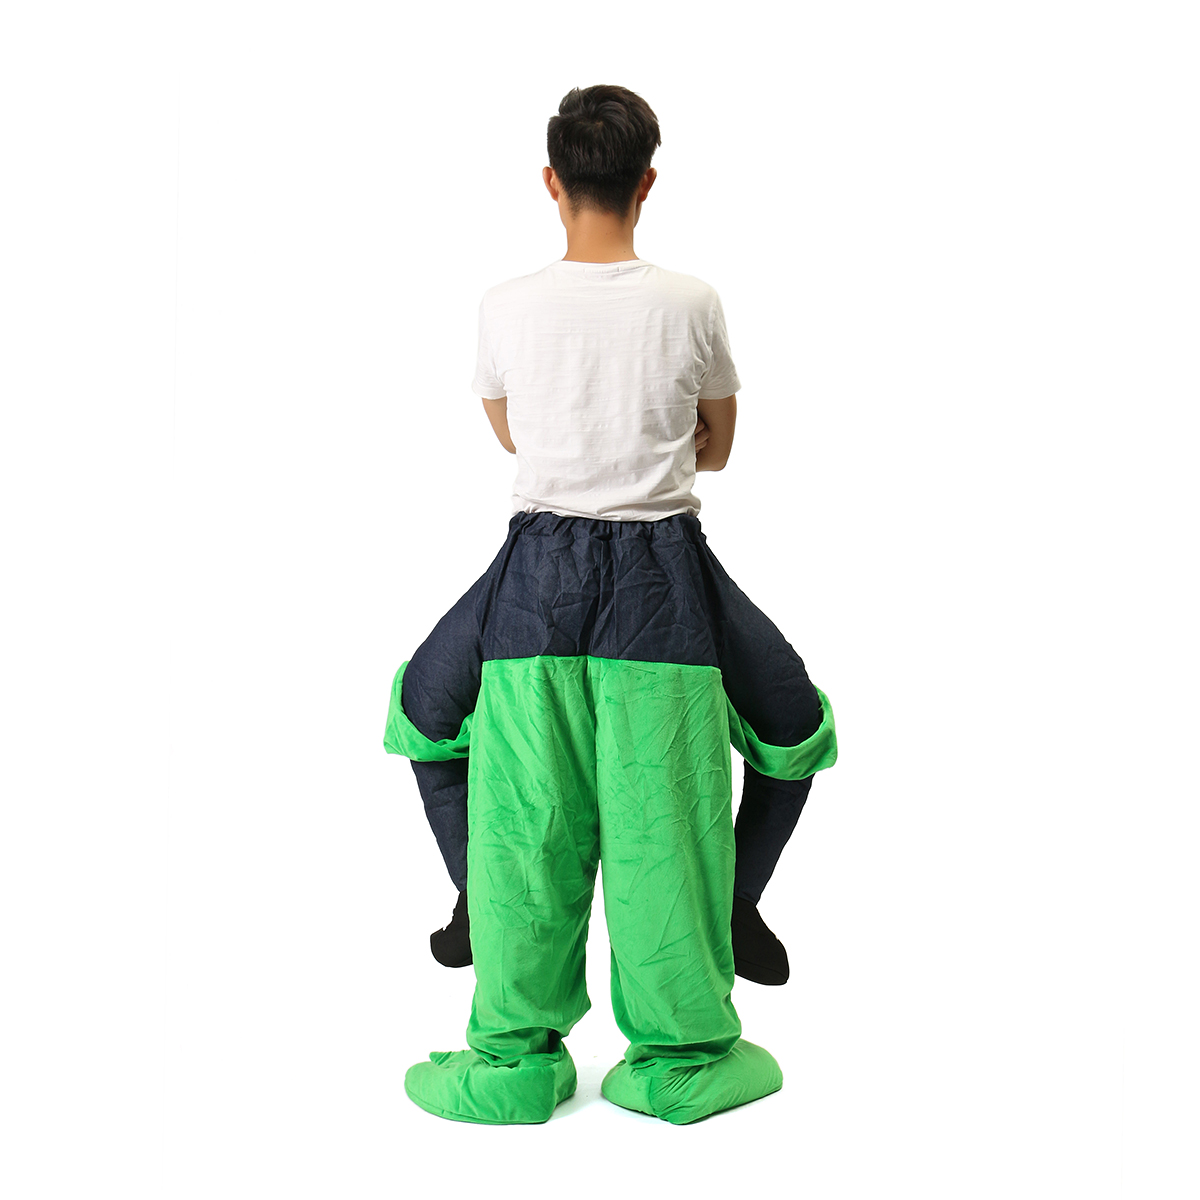 Adult-Costumes-Halloween-Costume-Funny-Fancy-Dress-Sexy-Cosplay-Frog-Pants-With-False-Human-Legs-1230742